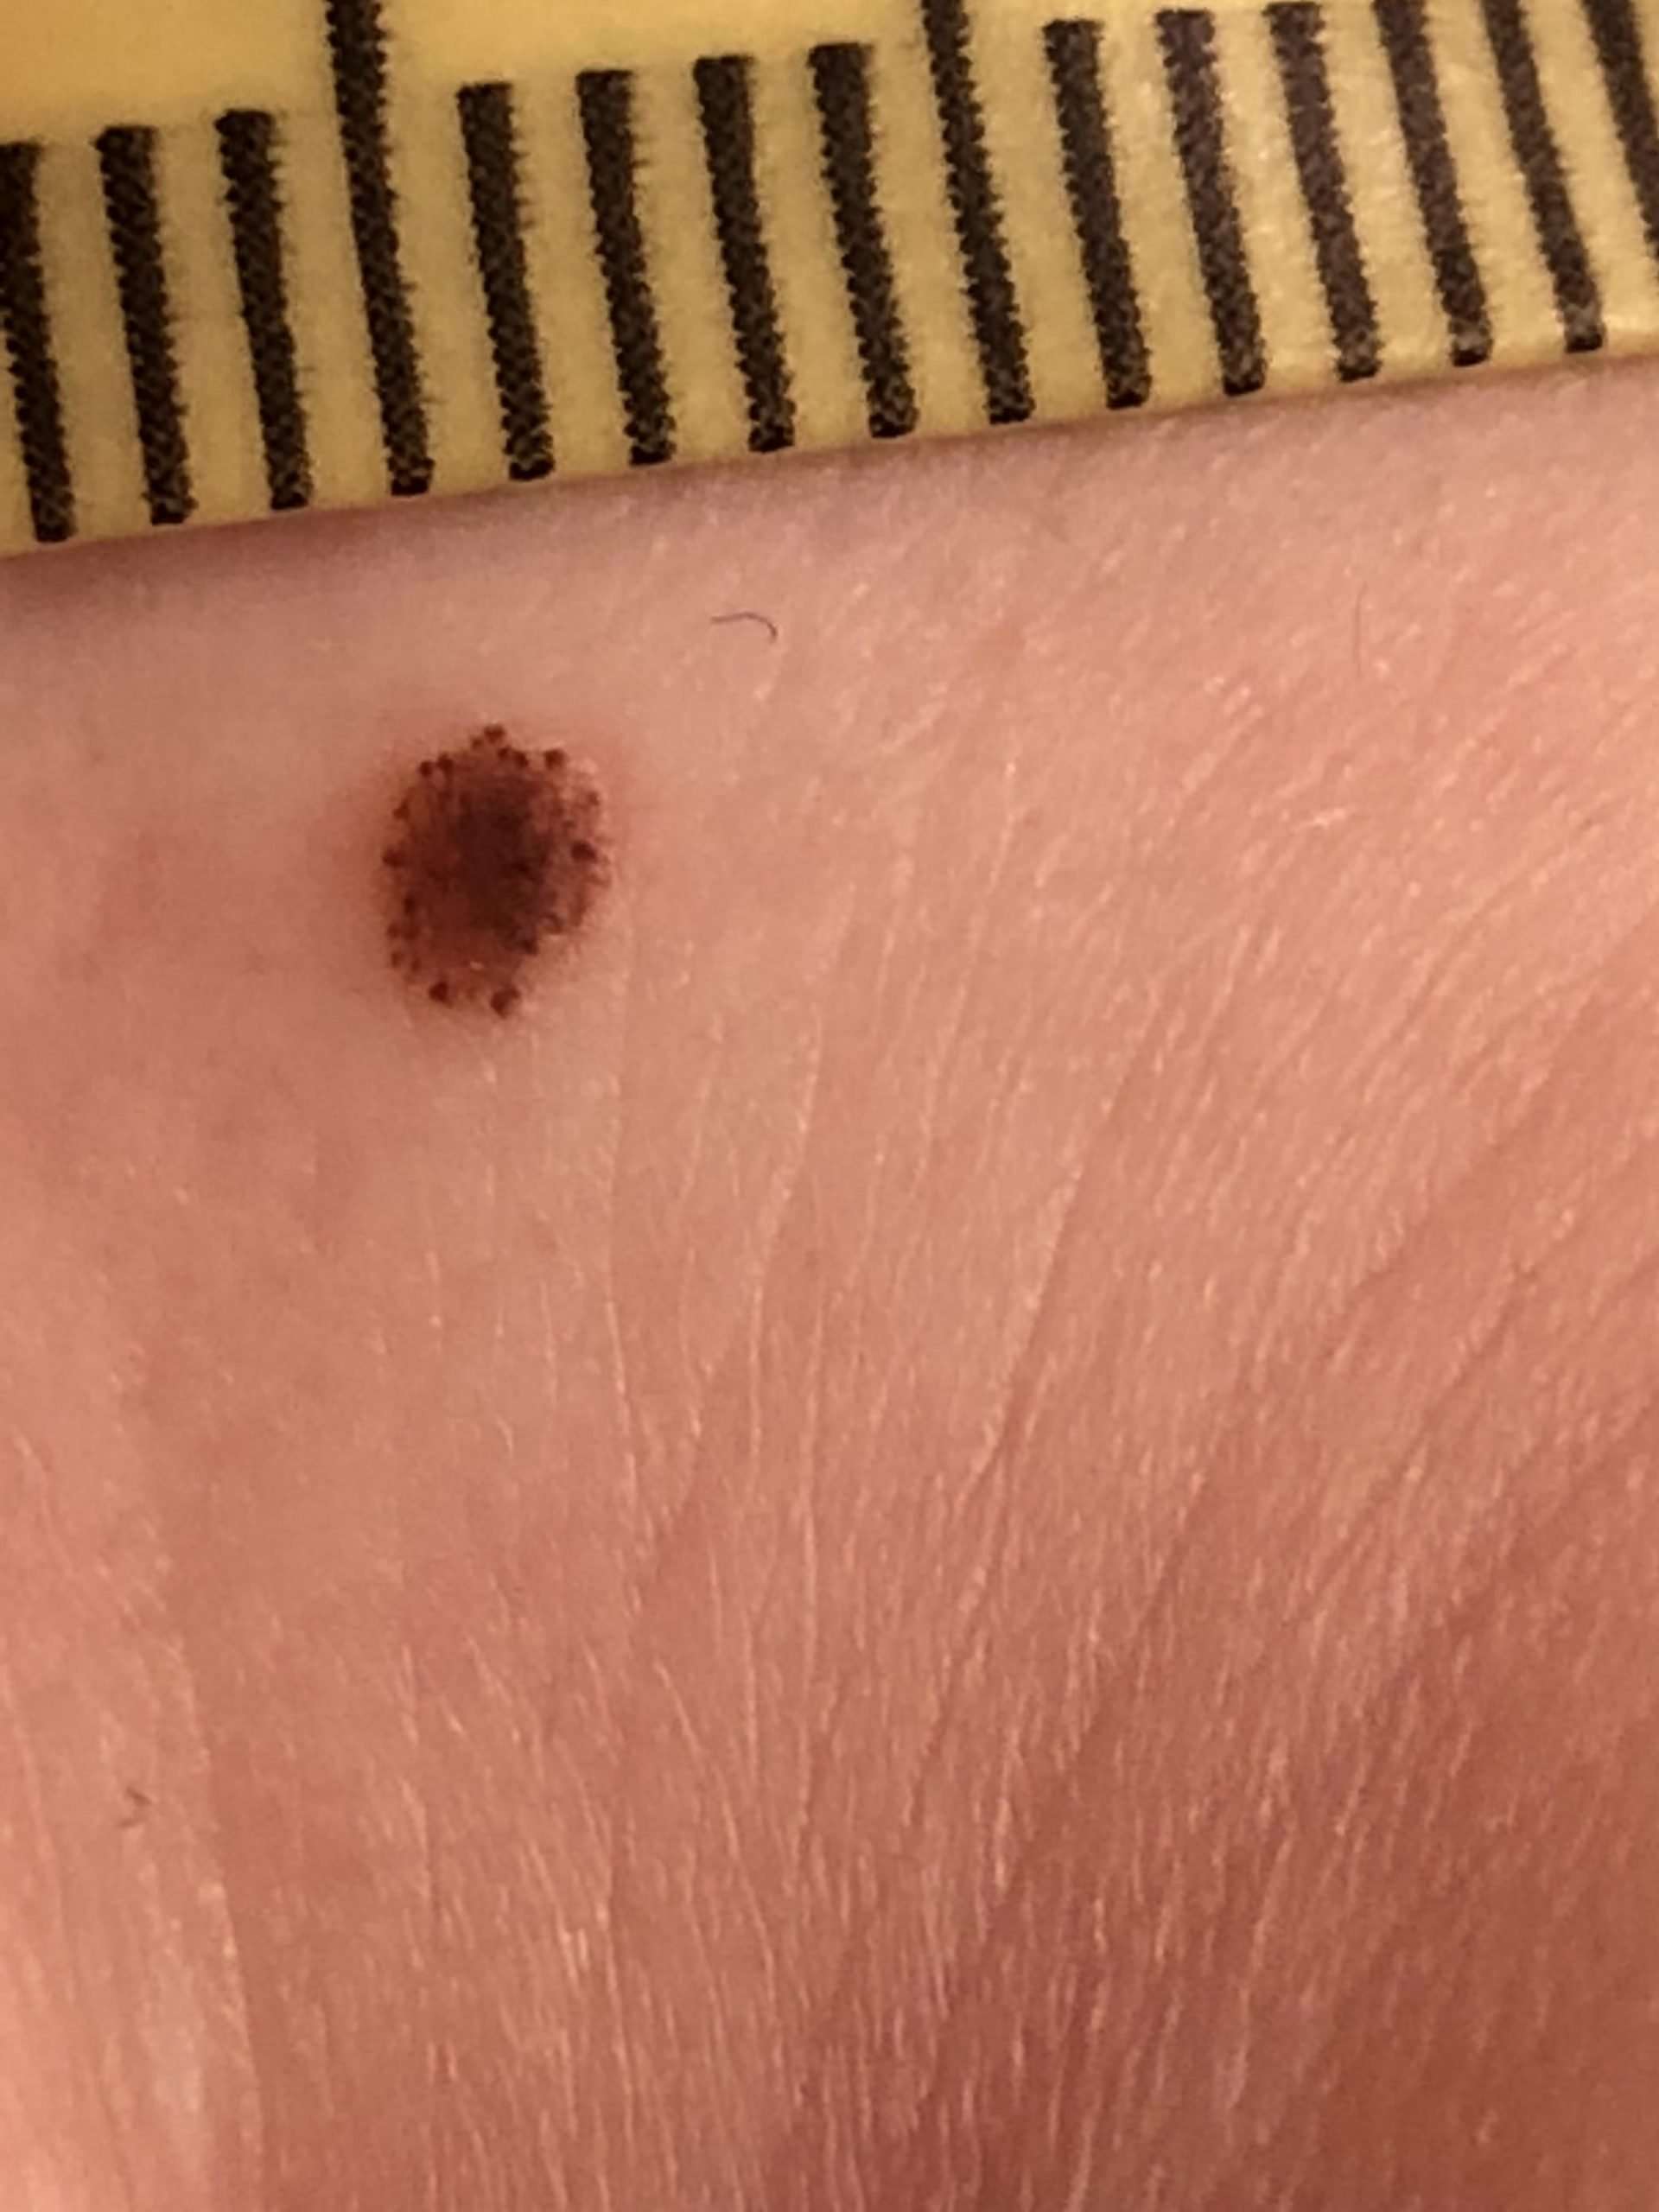 Does this look like melanoma? It has gotten darker and ...